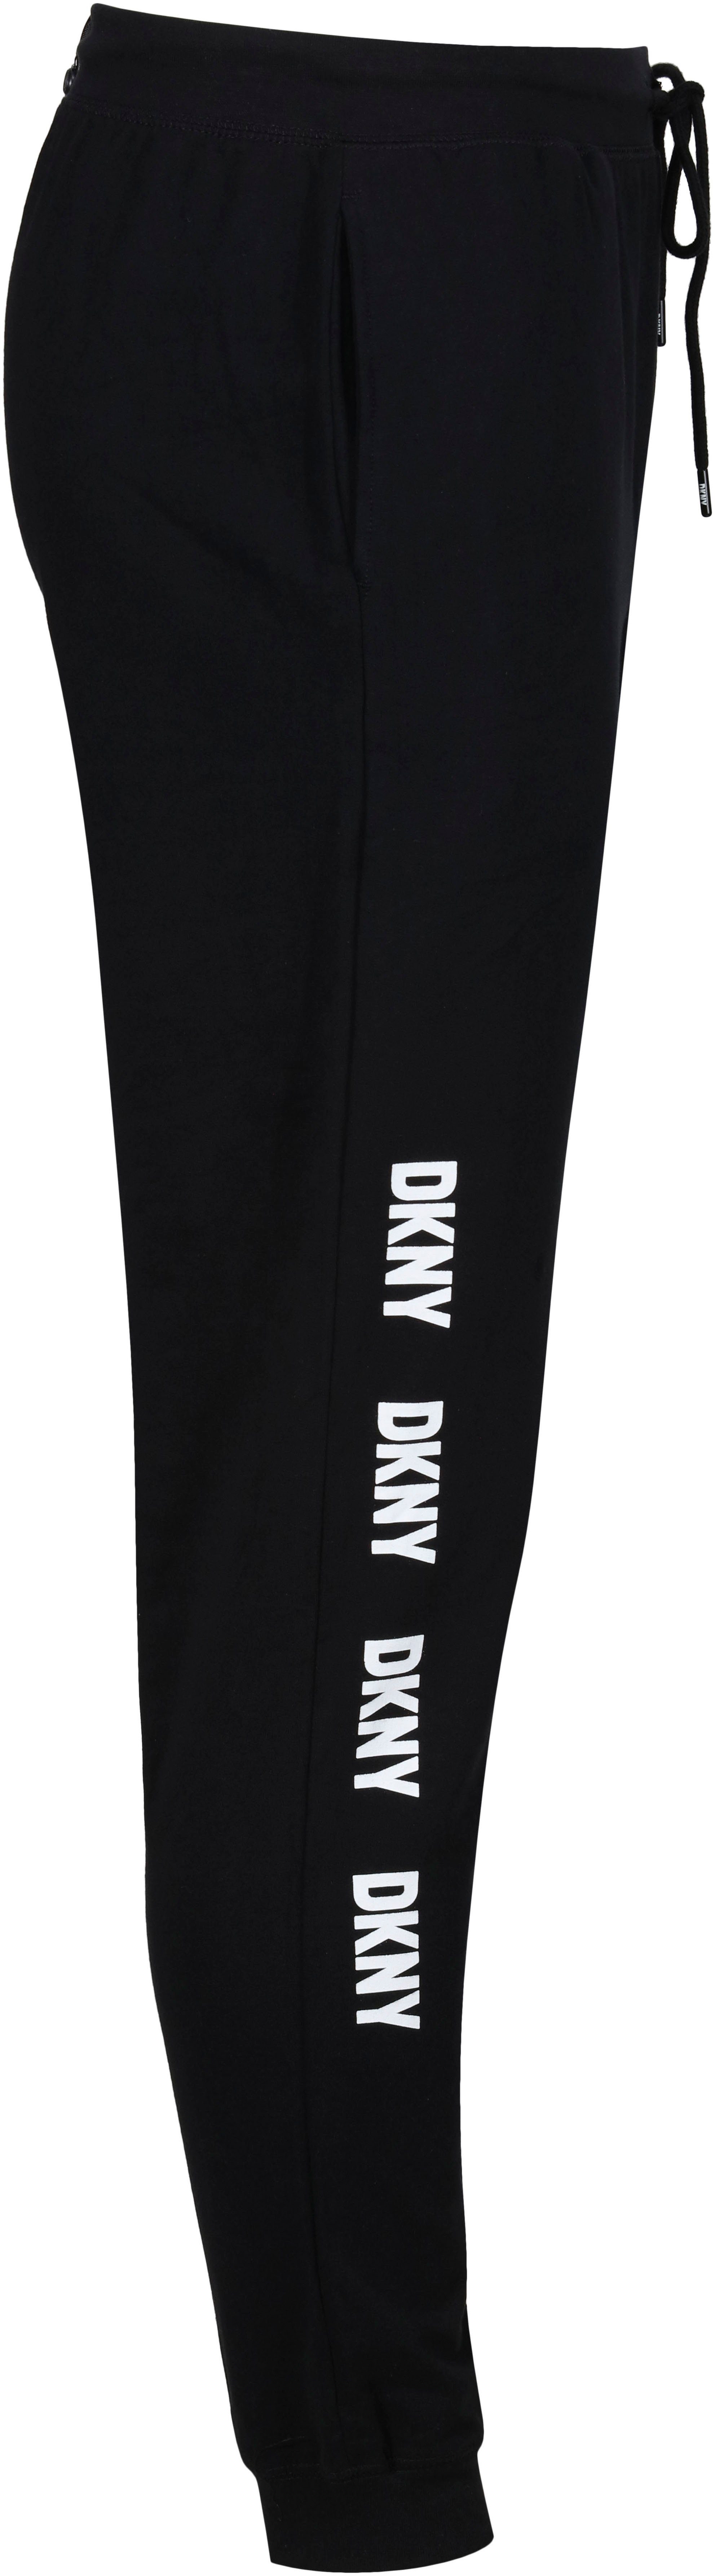 CLIPPERS DKNY Loungepants